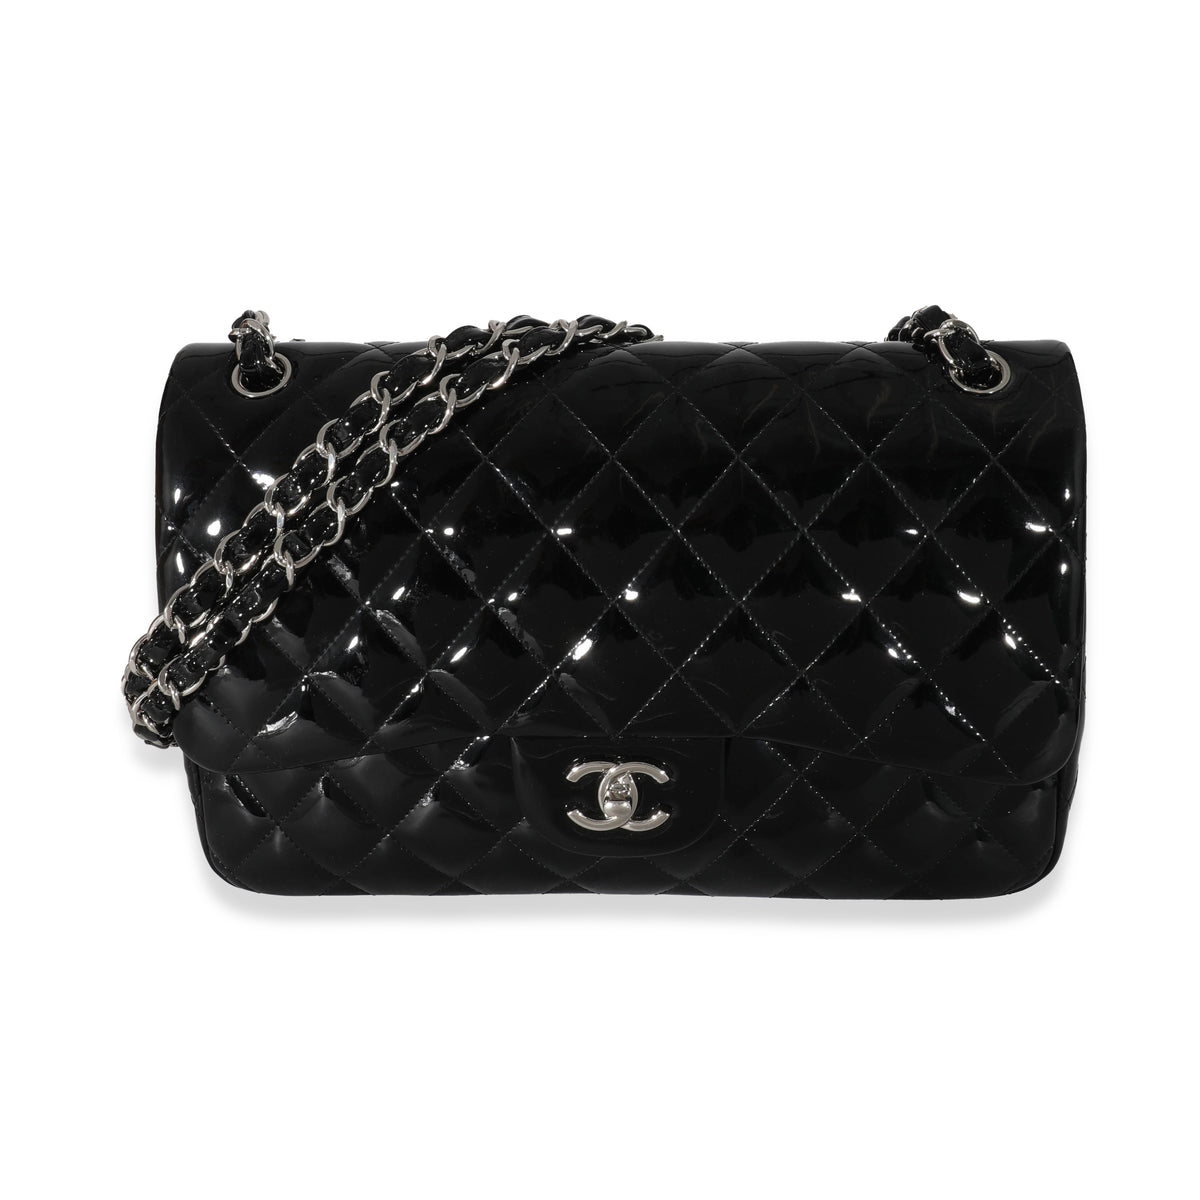 Chanel Black Quilted Patent Leather Jumbo Classic Single Flap Bag, myGemma, CH